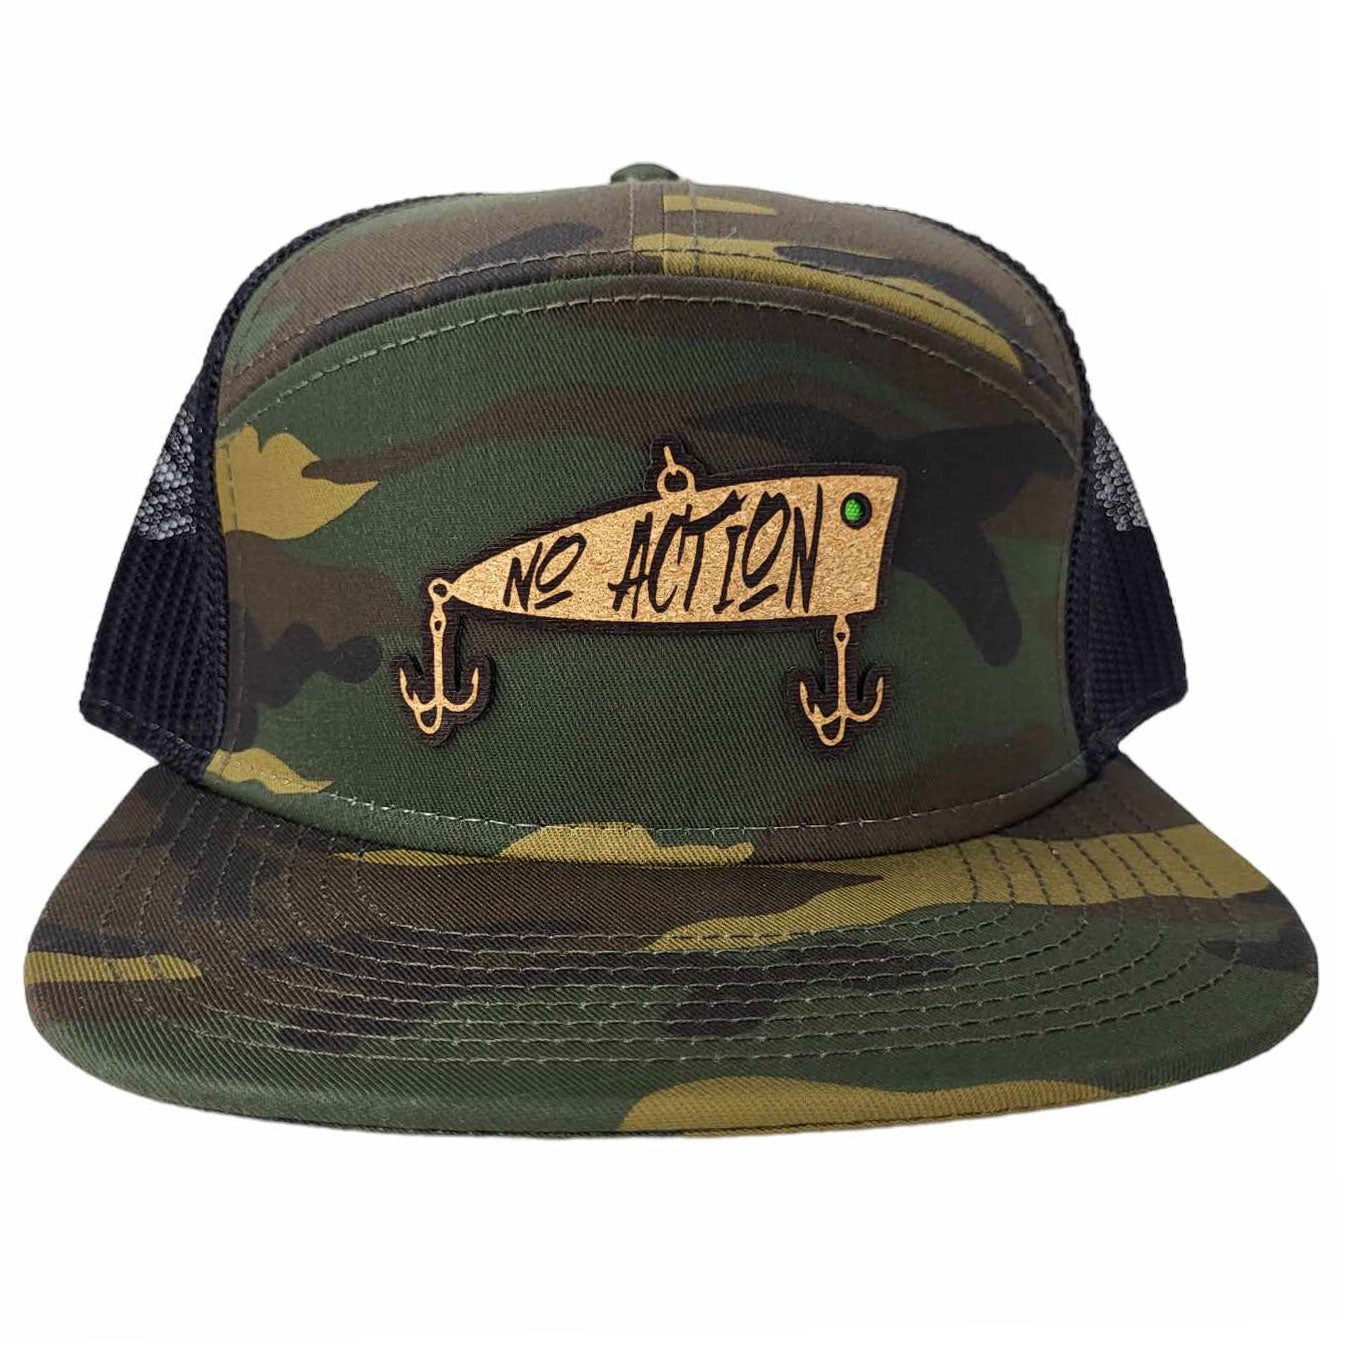 No Action Fishing Cork Patch Hat